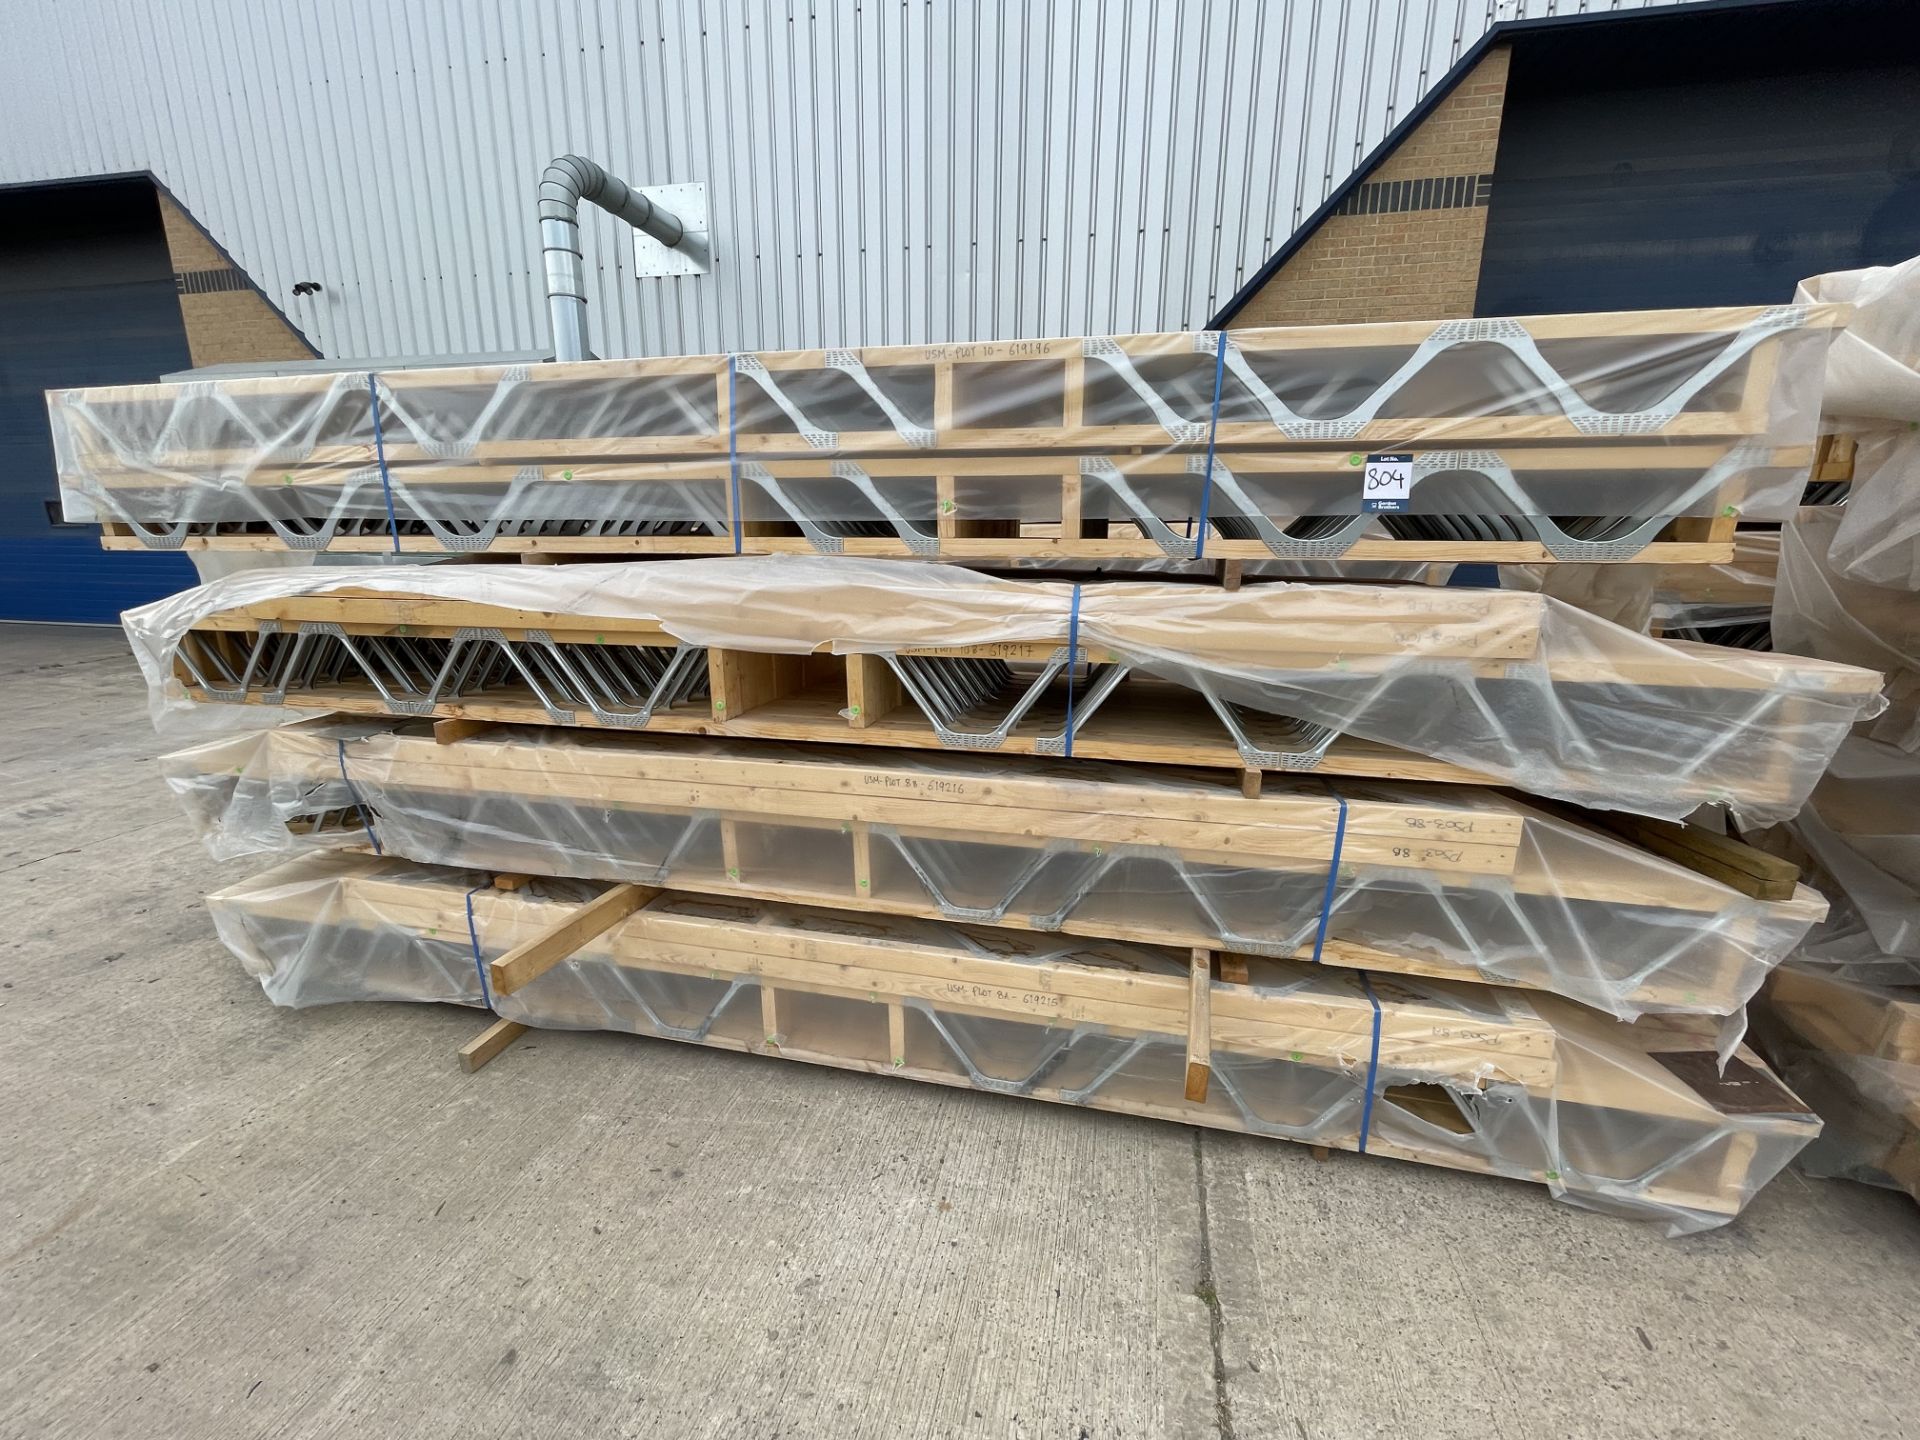 Large Quantity of Various Size Bracketed Timber Truss Beams - Image 4 of 11